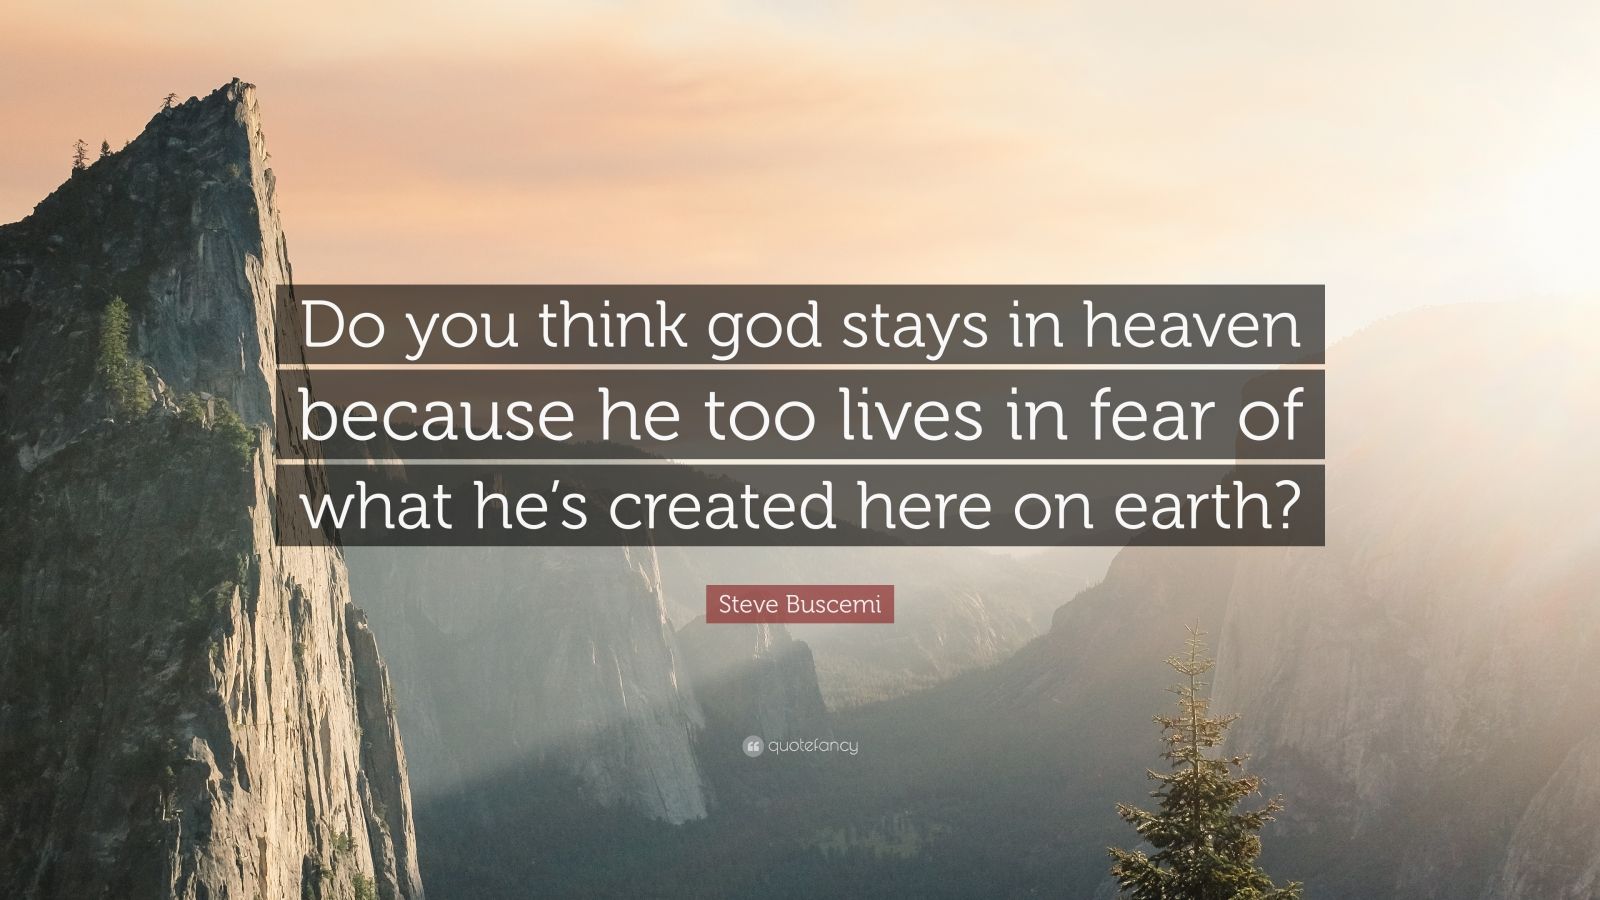 Steve Buscemi Quote: "Do you think god stays in heaven because he too lives in fear of what he's ...